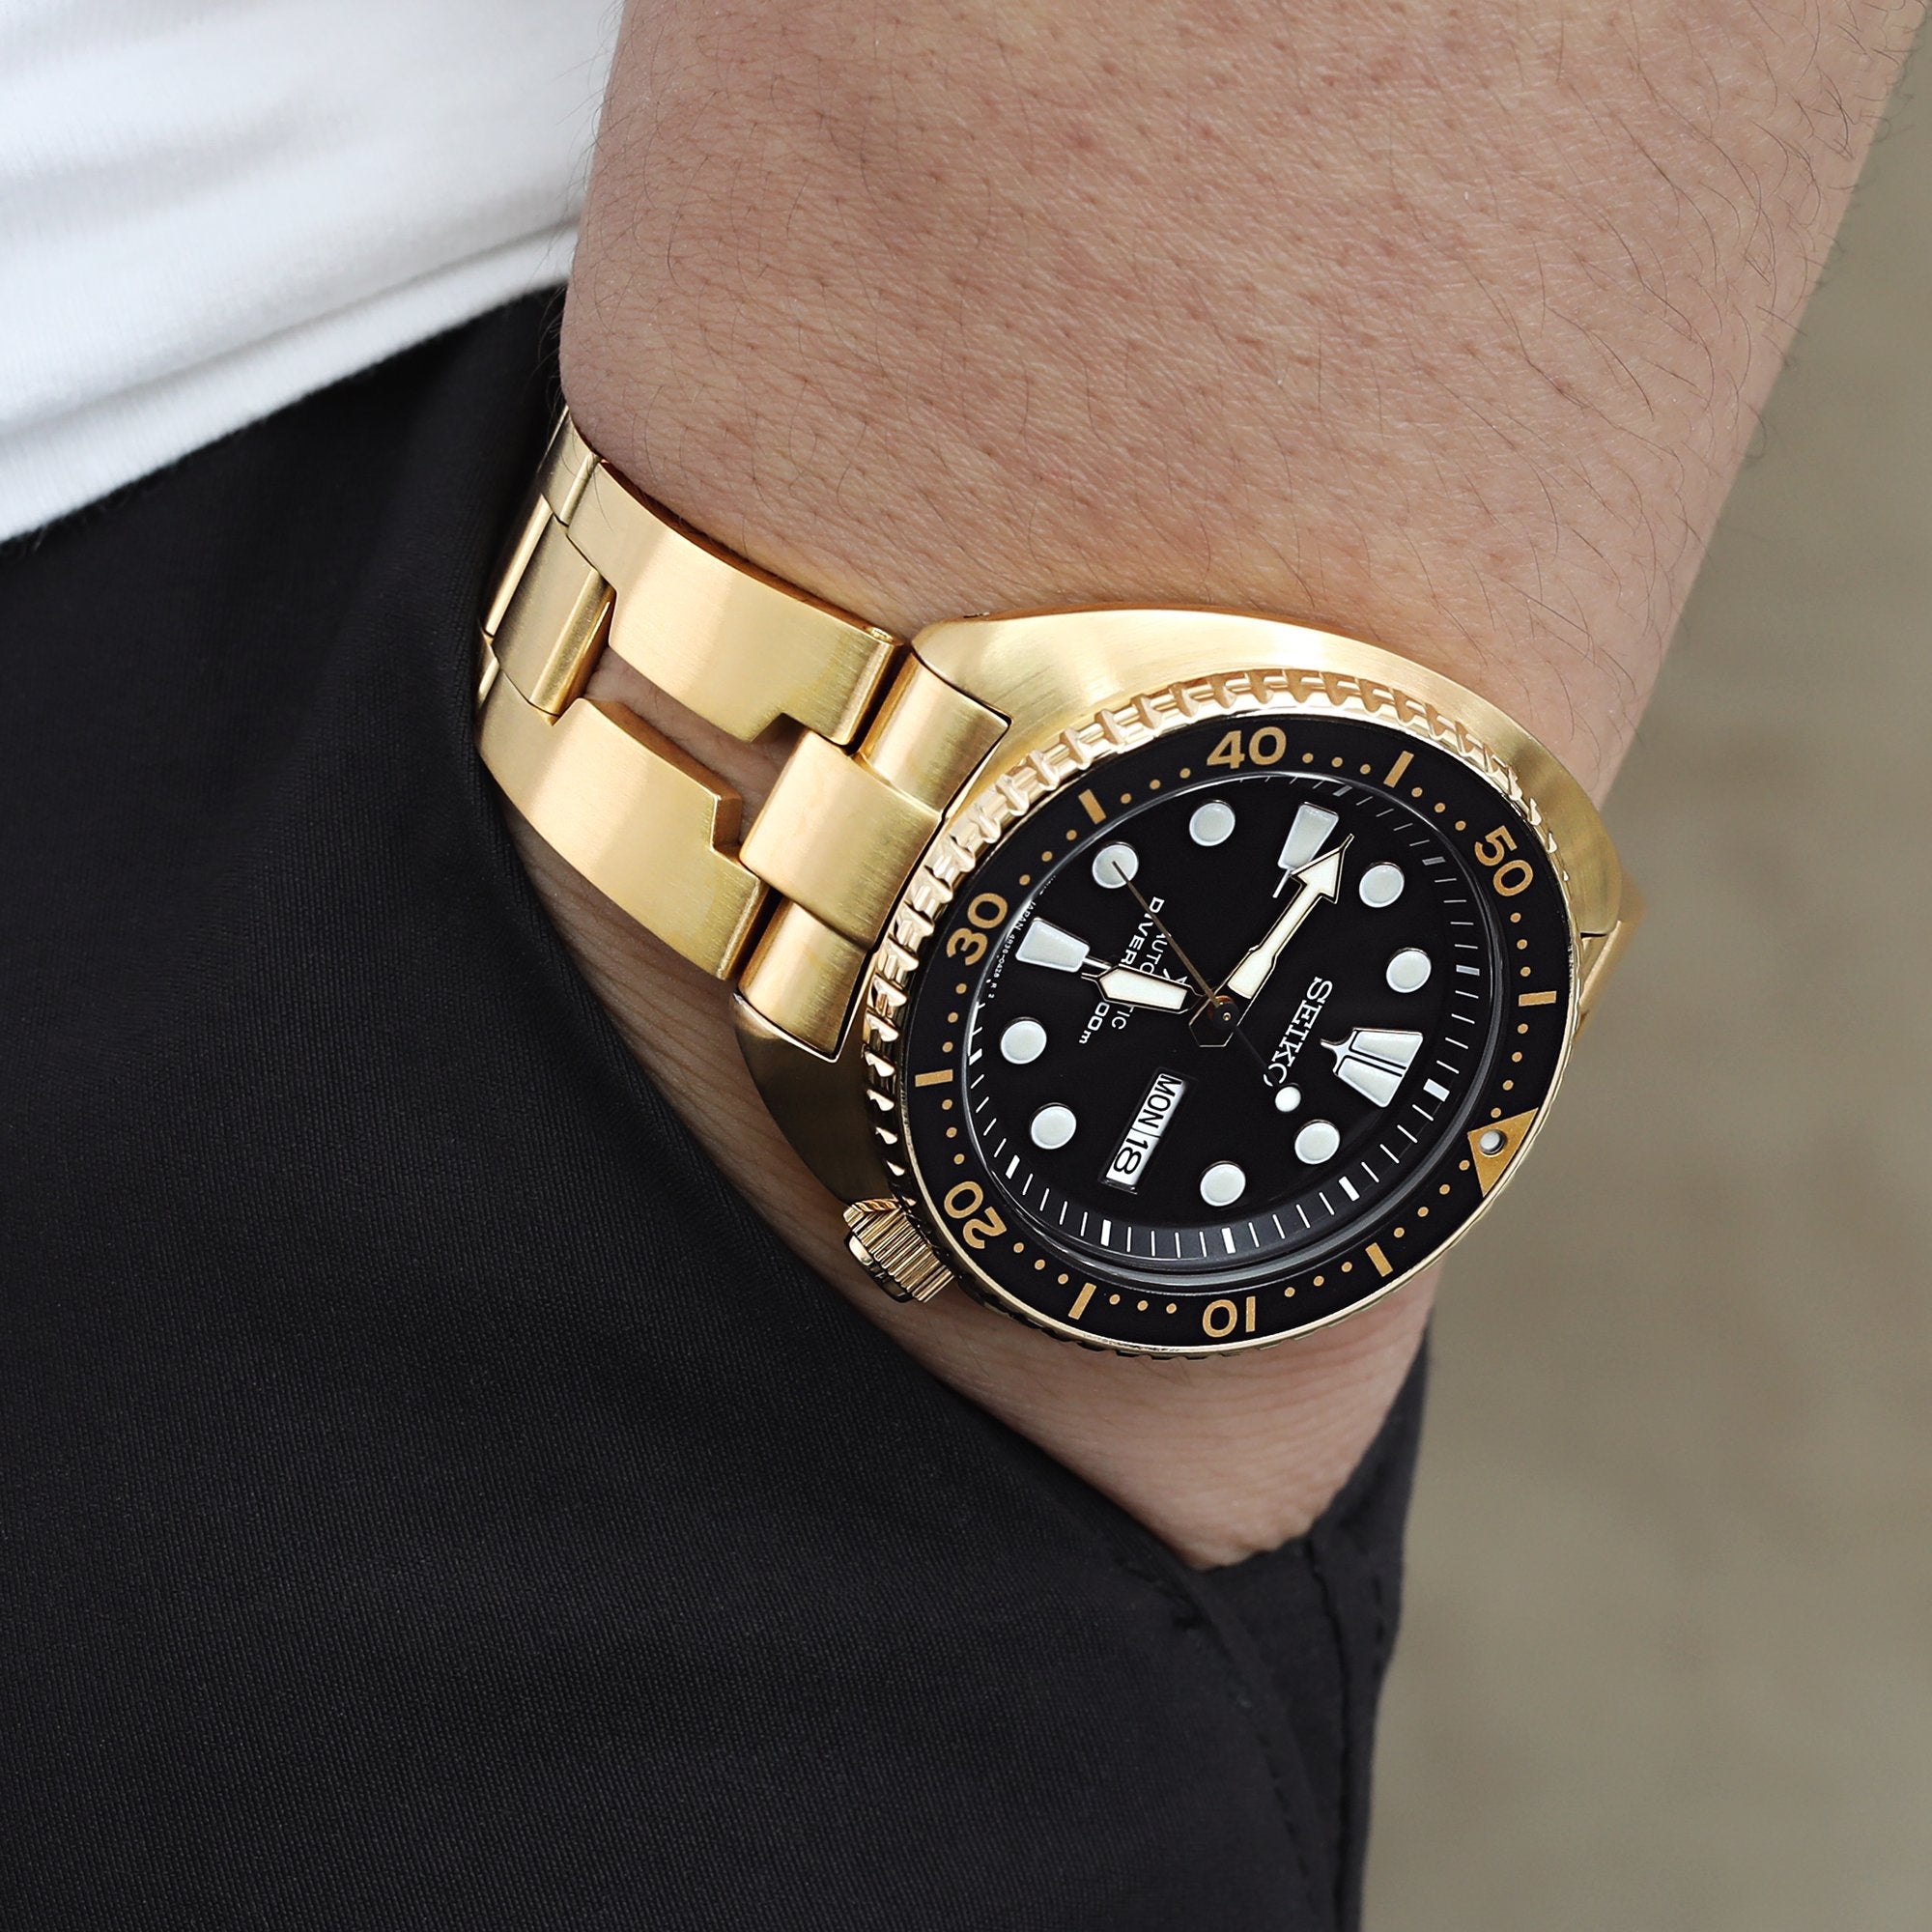 The Seiko Gold Turtle SRPC44 watch paired with a matching gold-tone Razor watch band by Strapcode 